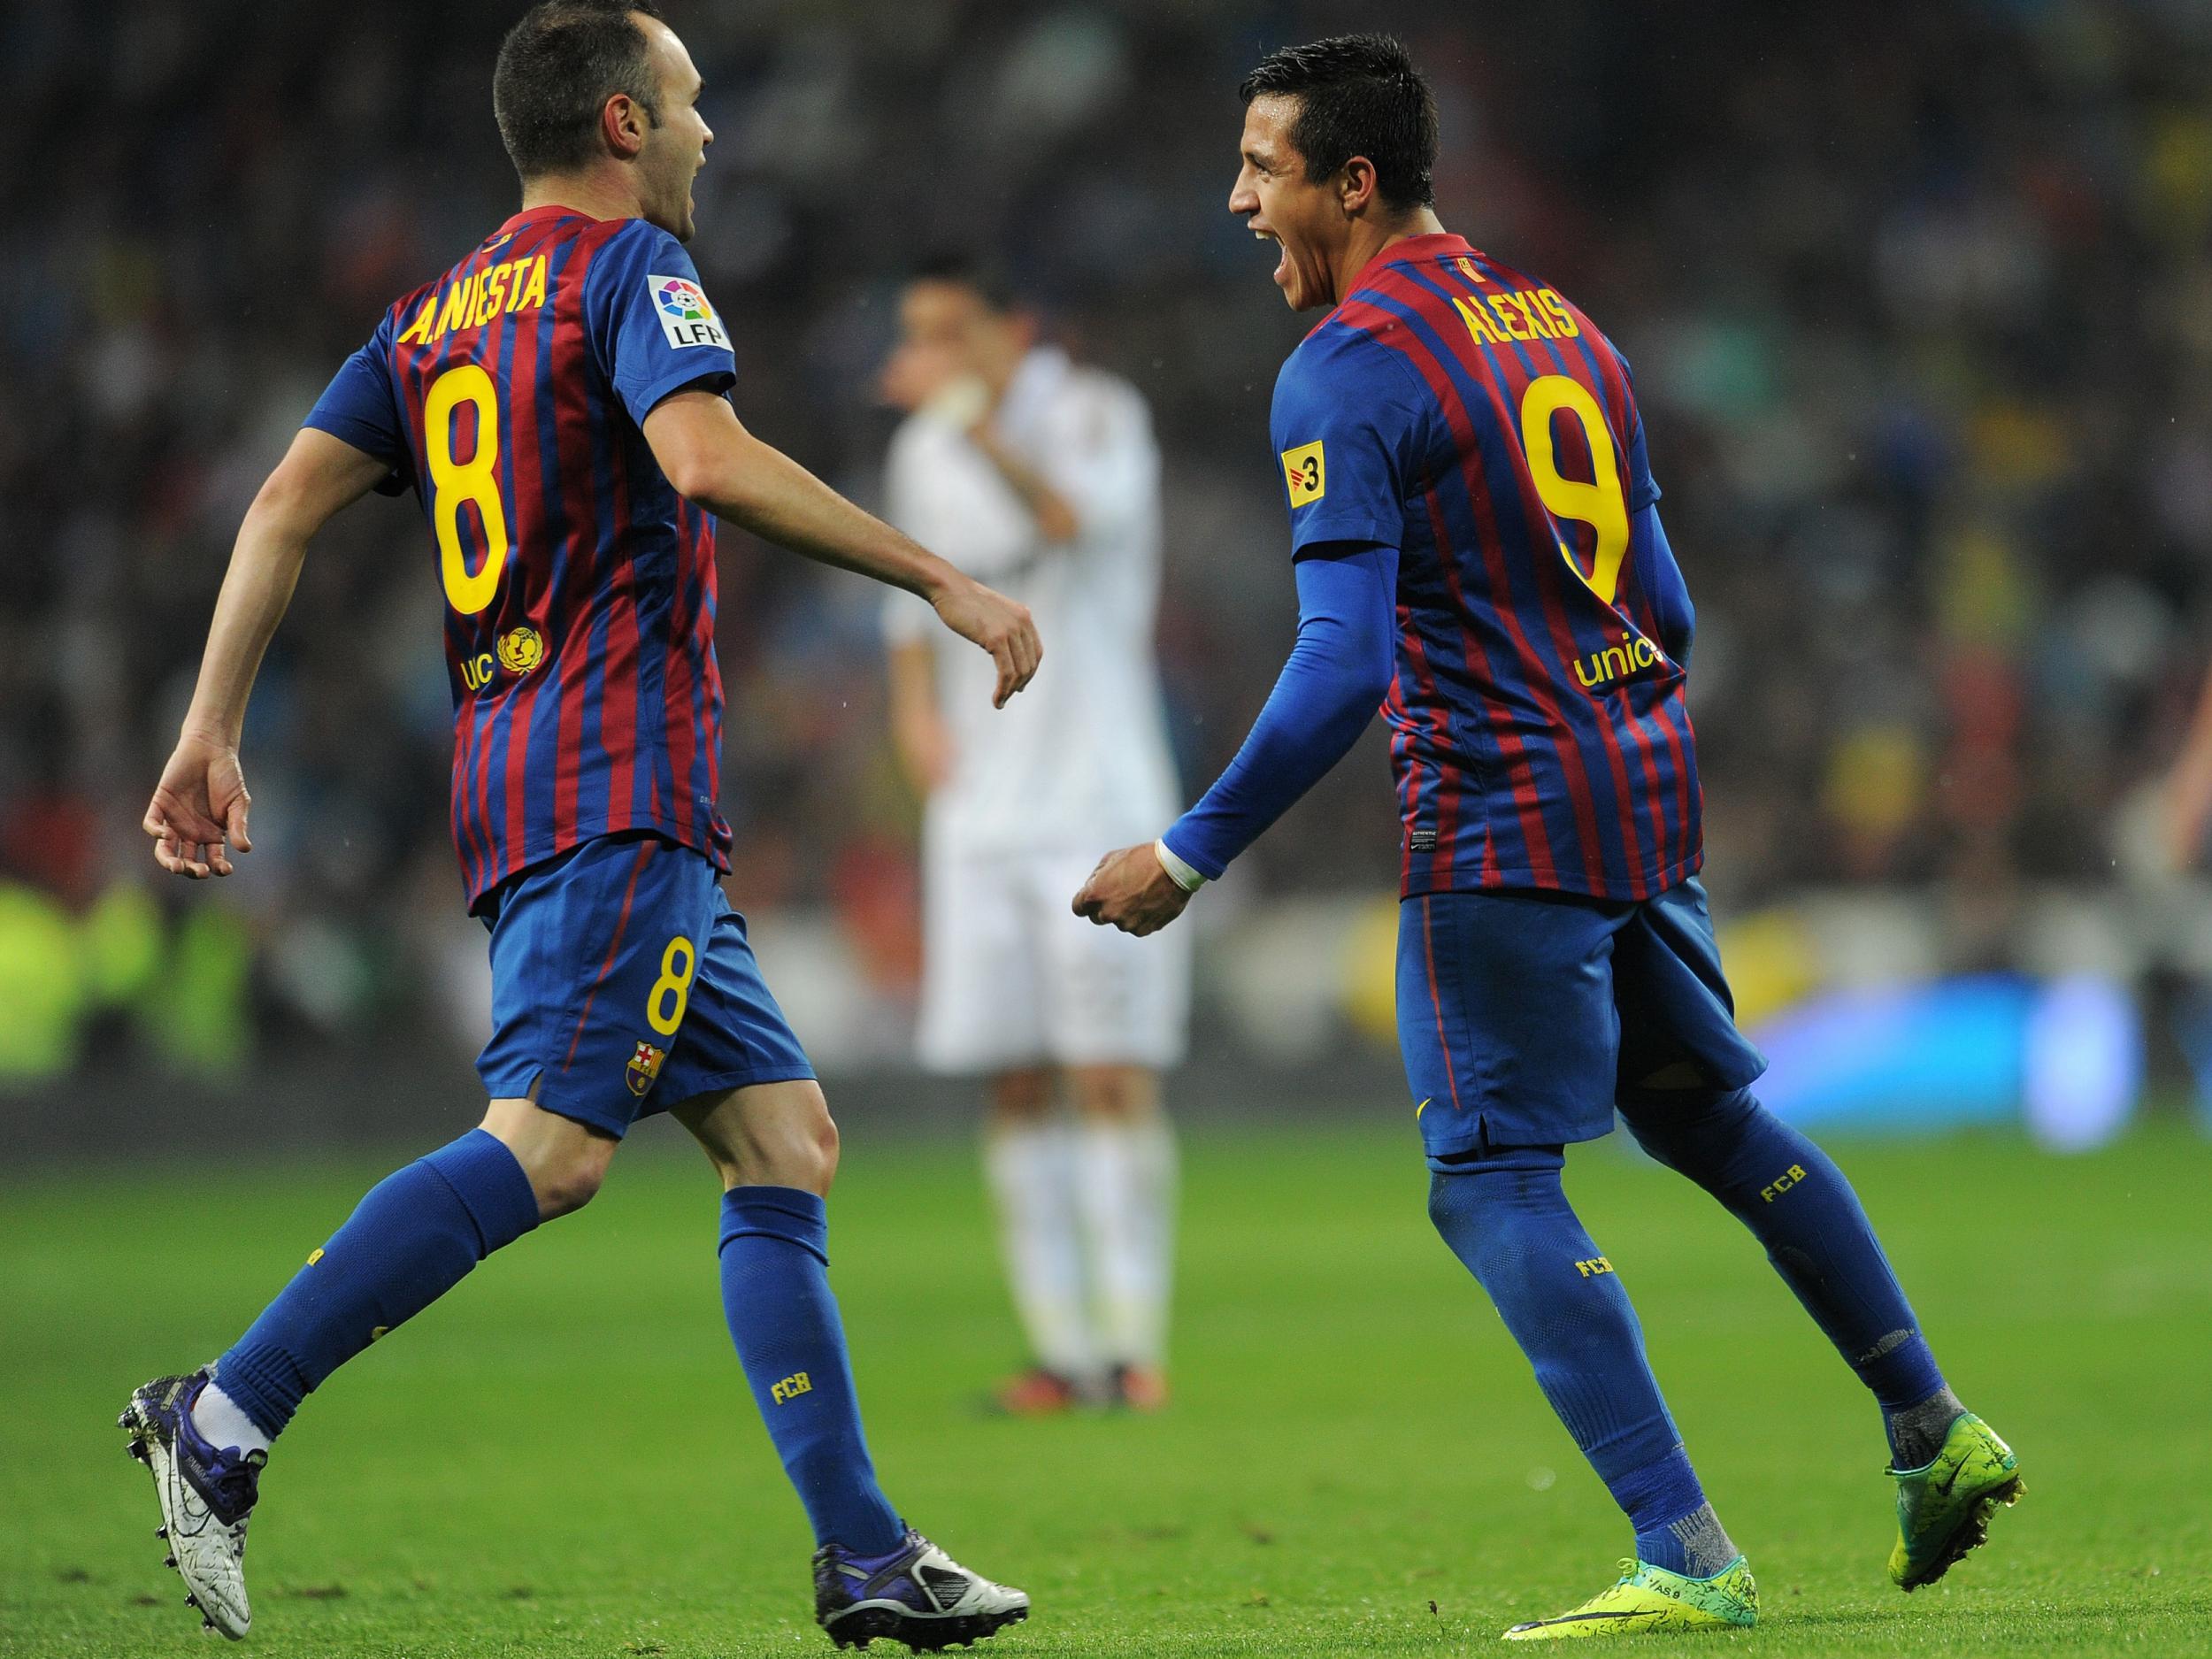 Andres Iniesta and Alexis Sanchez during their time together at Barcelona